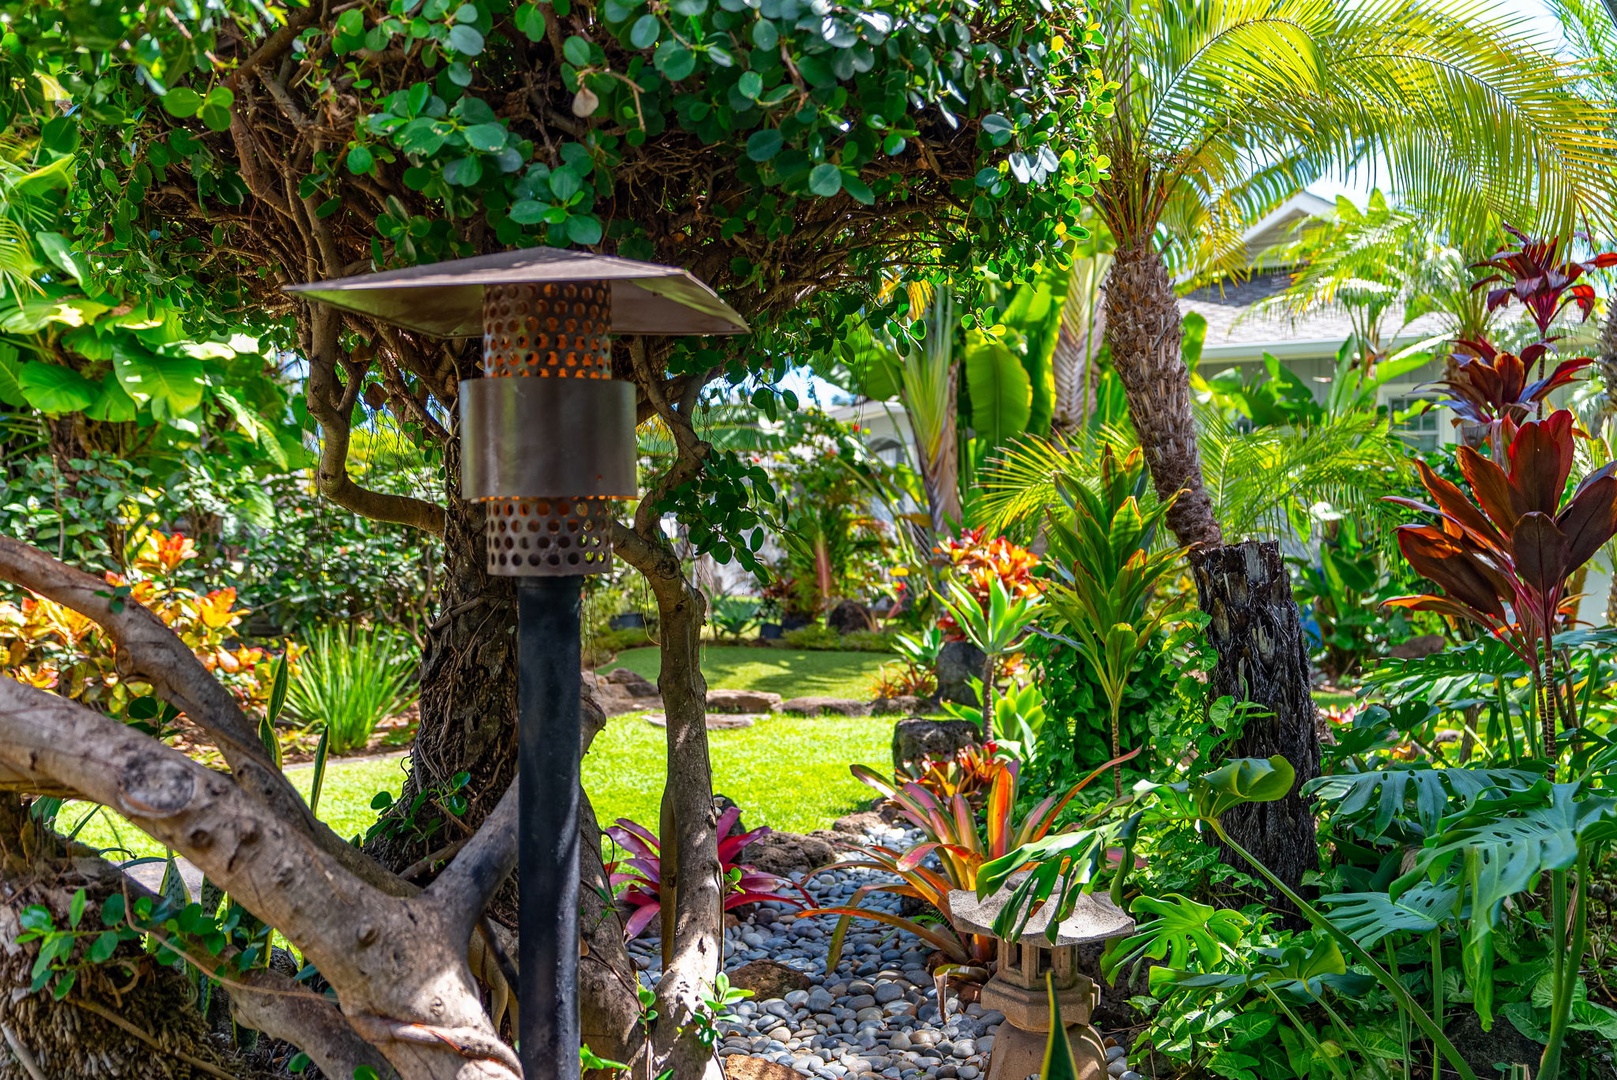 Kailua Vacation Rentals, Hale Aloha - Surrounded by lush tropical flora.